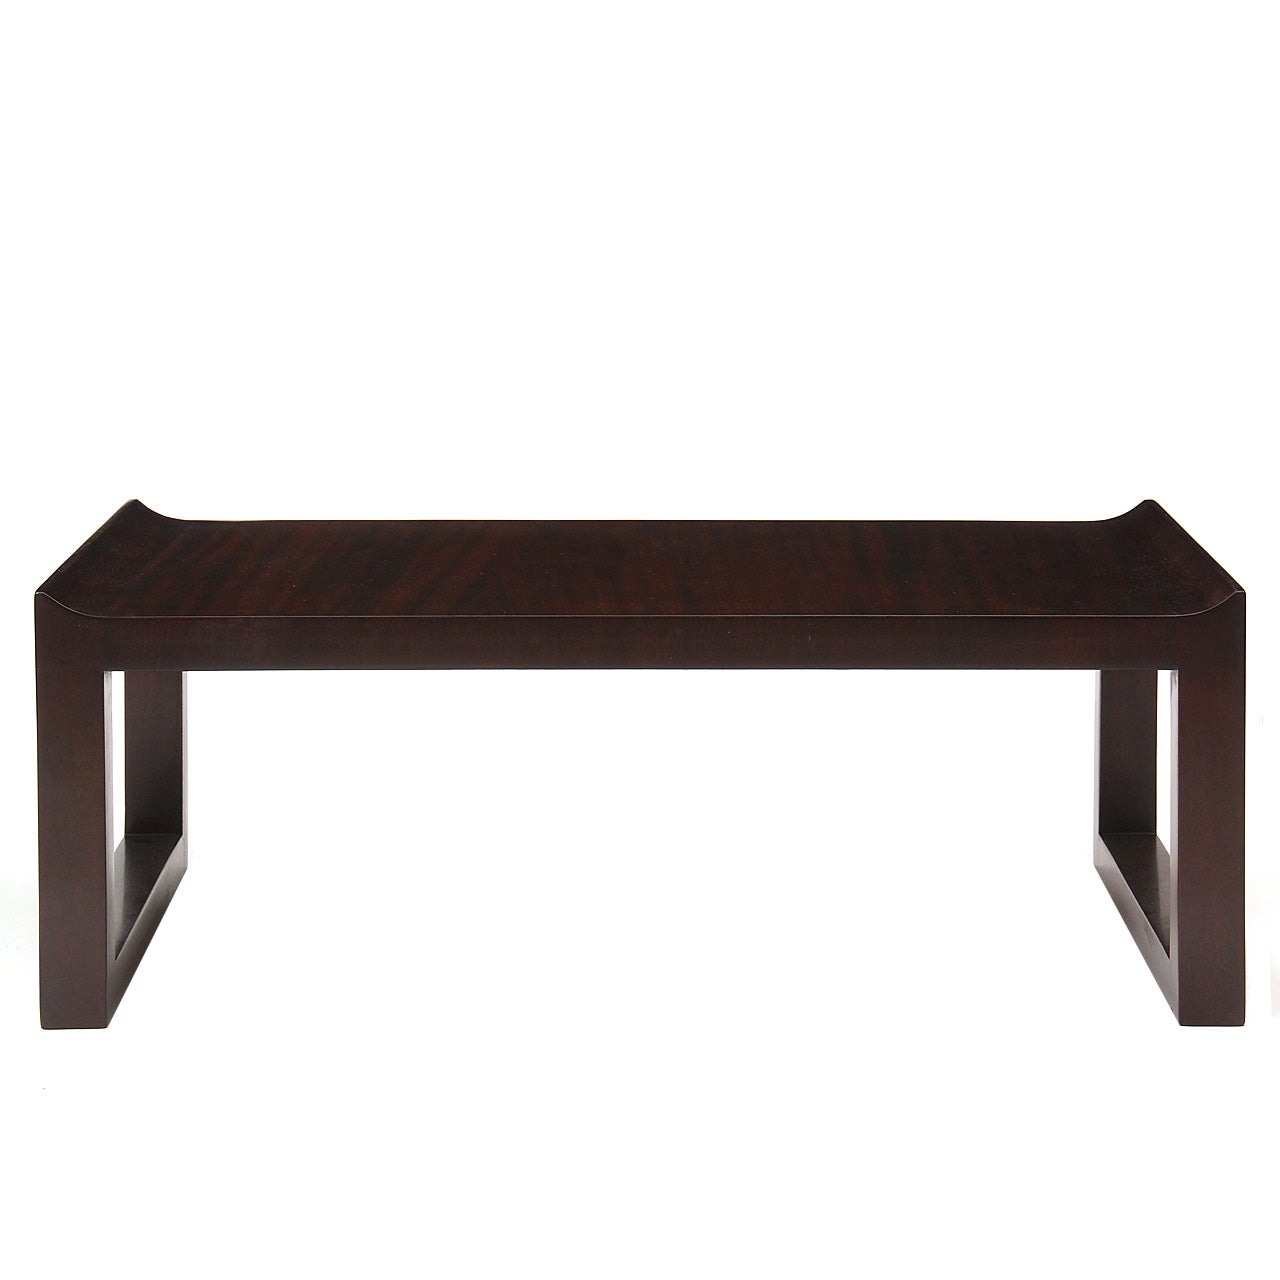 Low Table By Edward Wormley For Dunbar